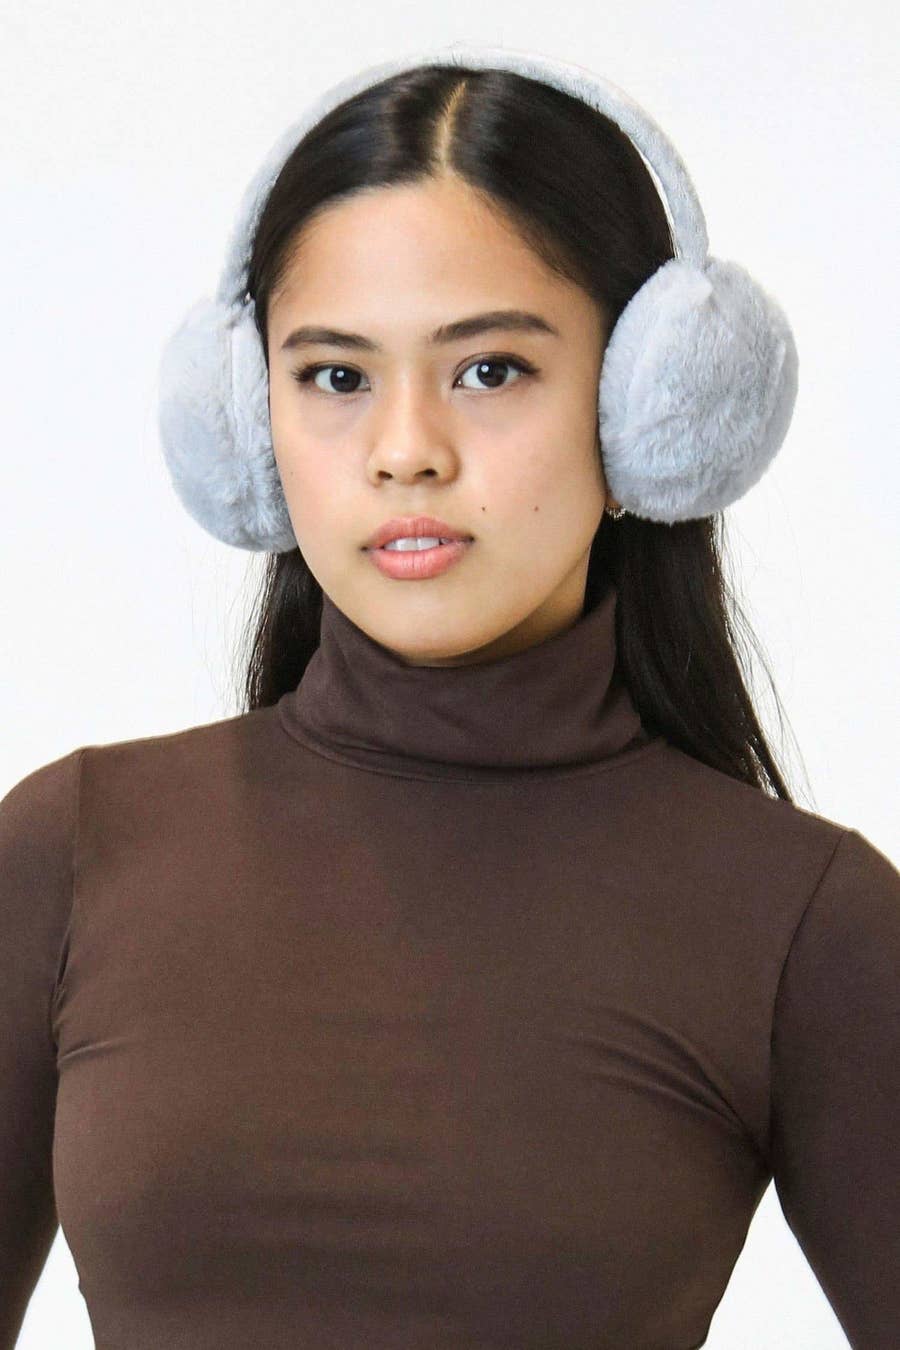 18 Of The Best Earmuffs For Winter Warmth 2022